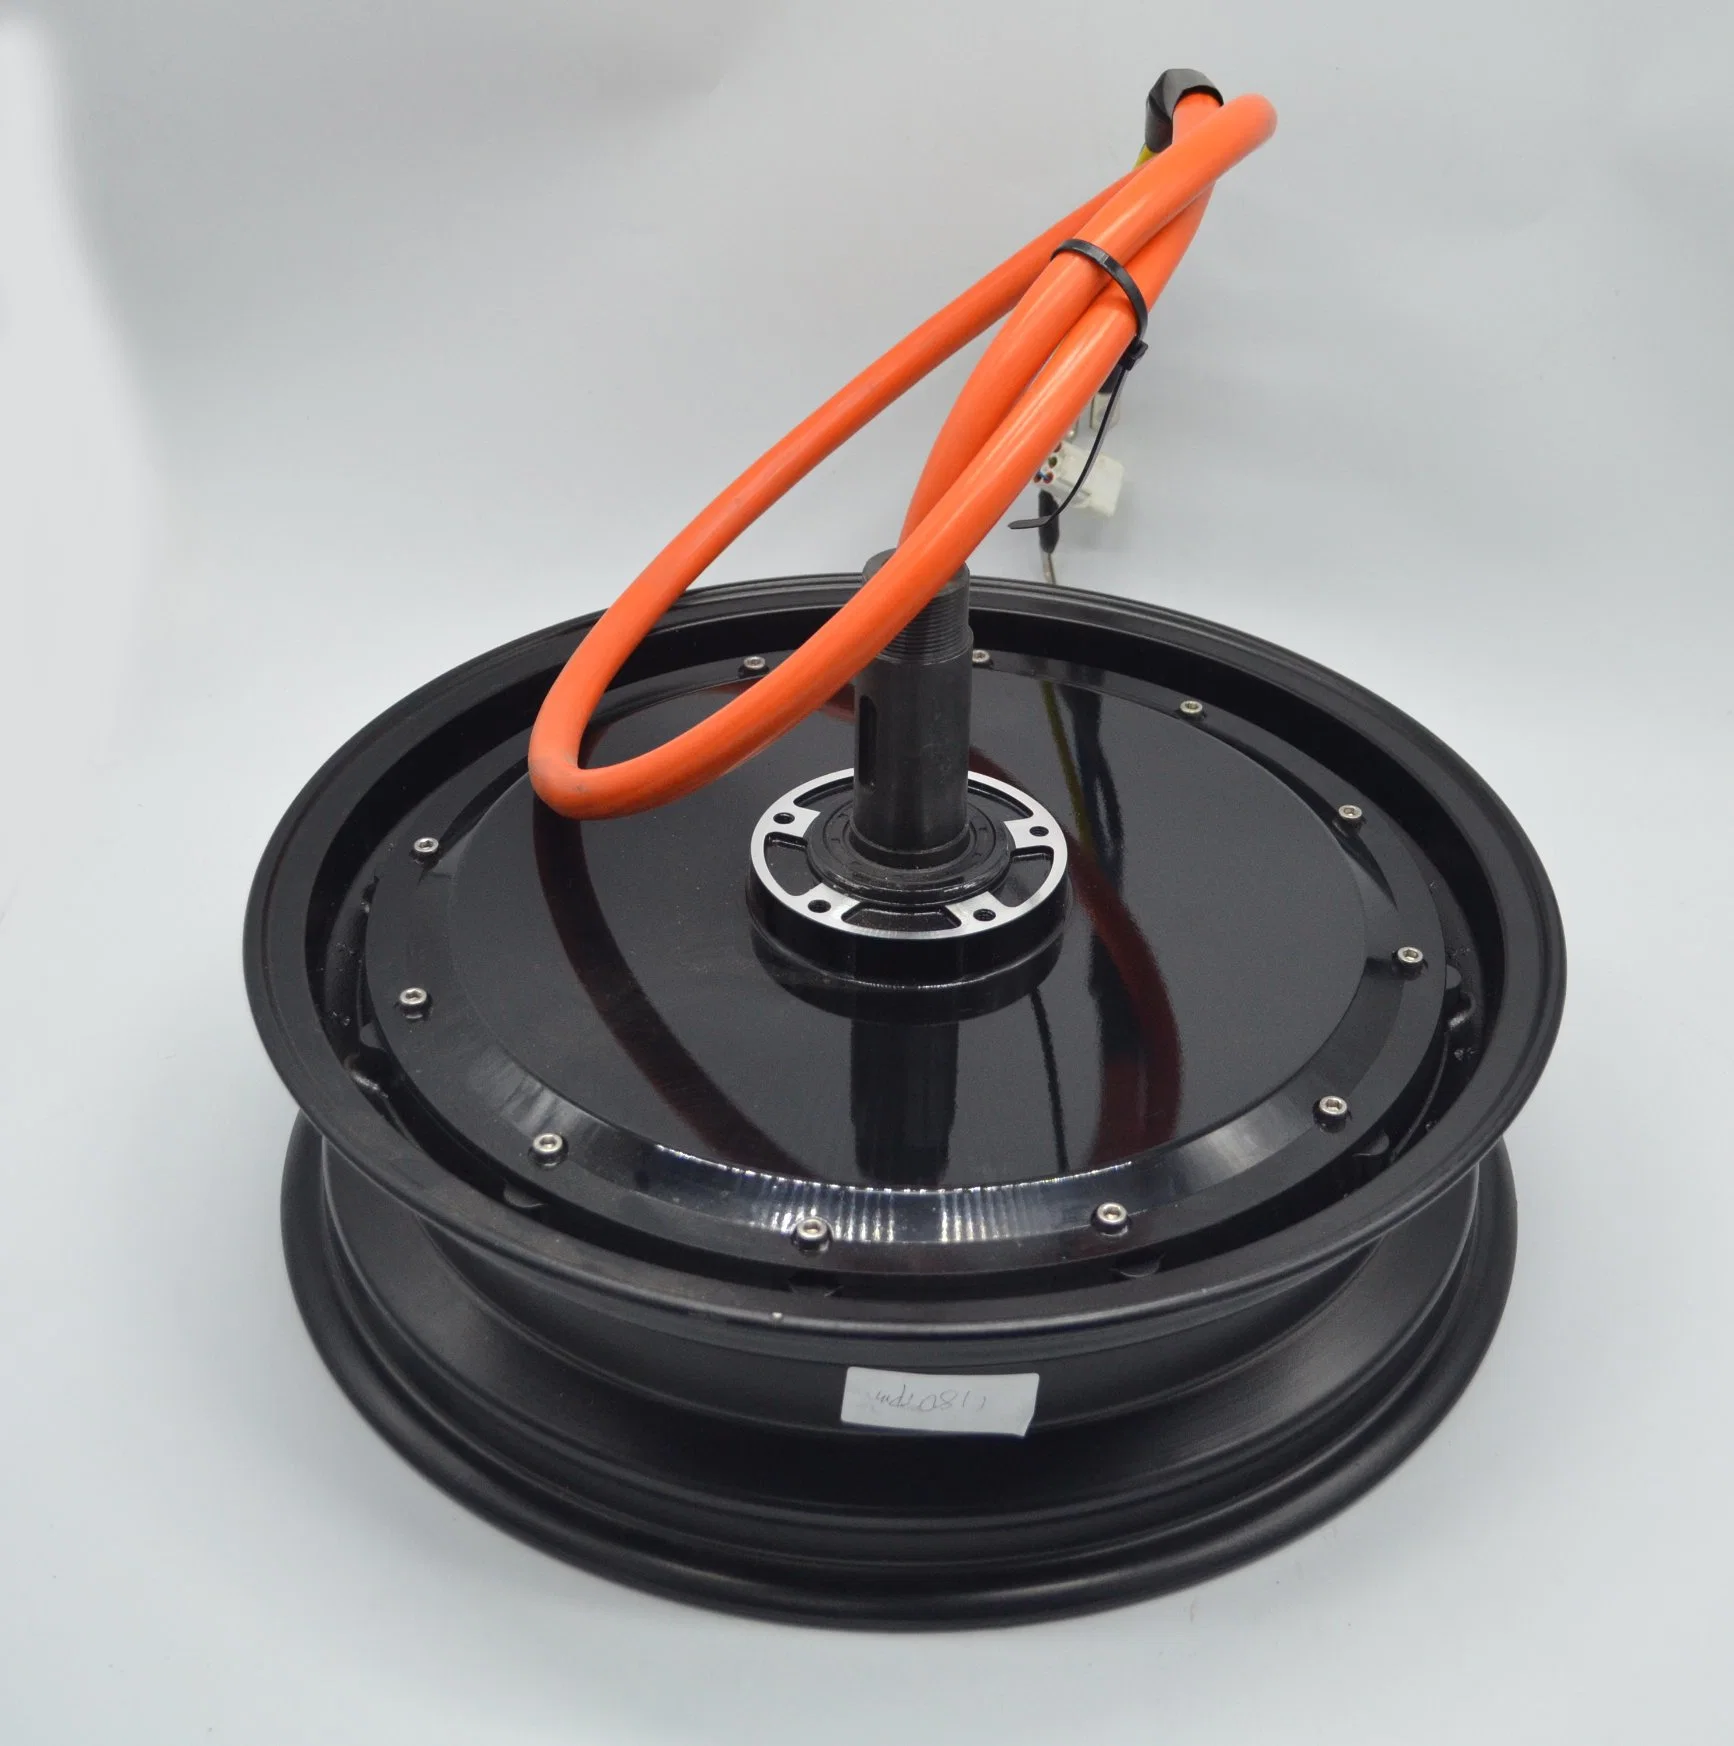 14" 1500W, 3000W, 6000W High Power Electric Motor for Electric Scooter, Motorcycle